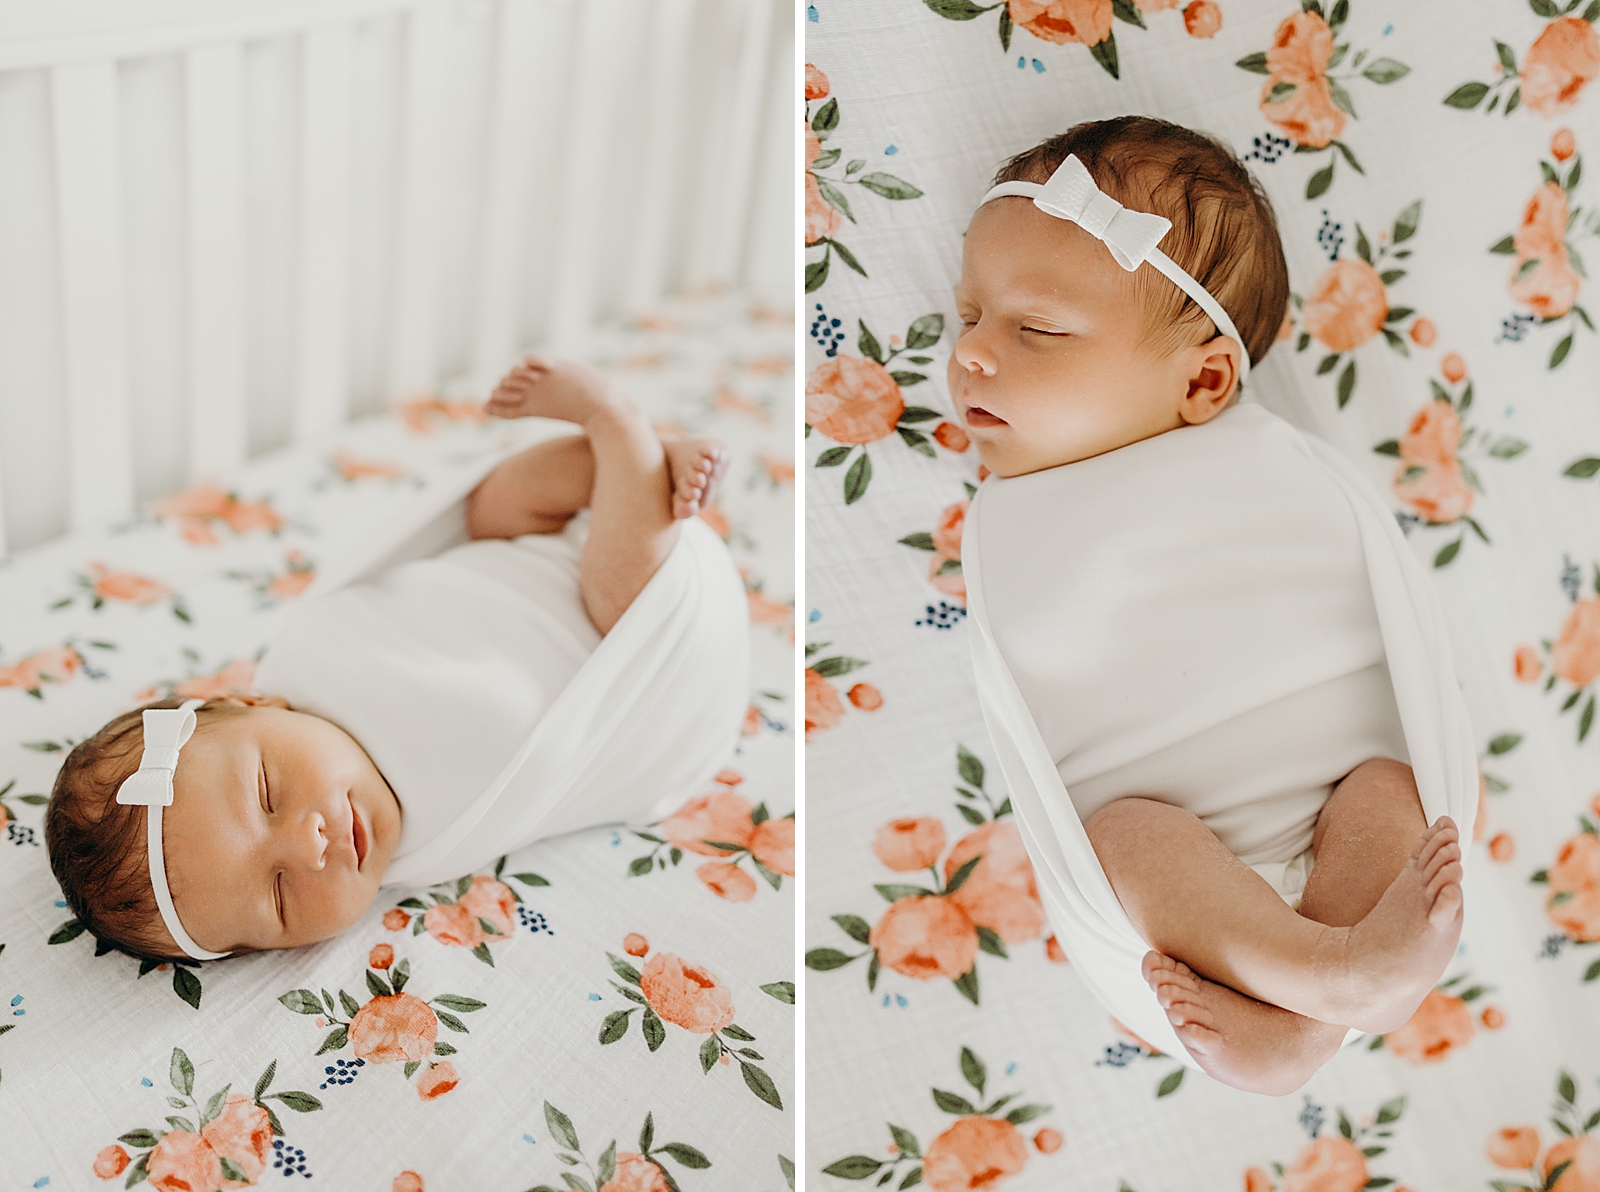 Baby smiling in their sleep on flower mattress South Florida Newborn Photography Photography captured by South Florida Family Photographer Maggie Alvarez Photography